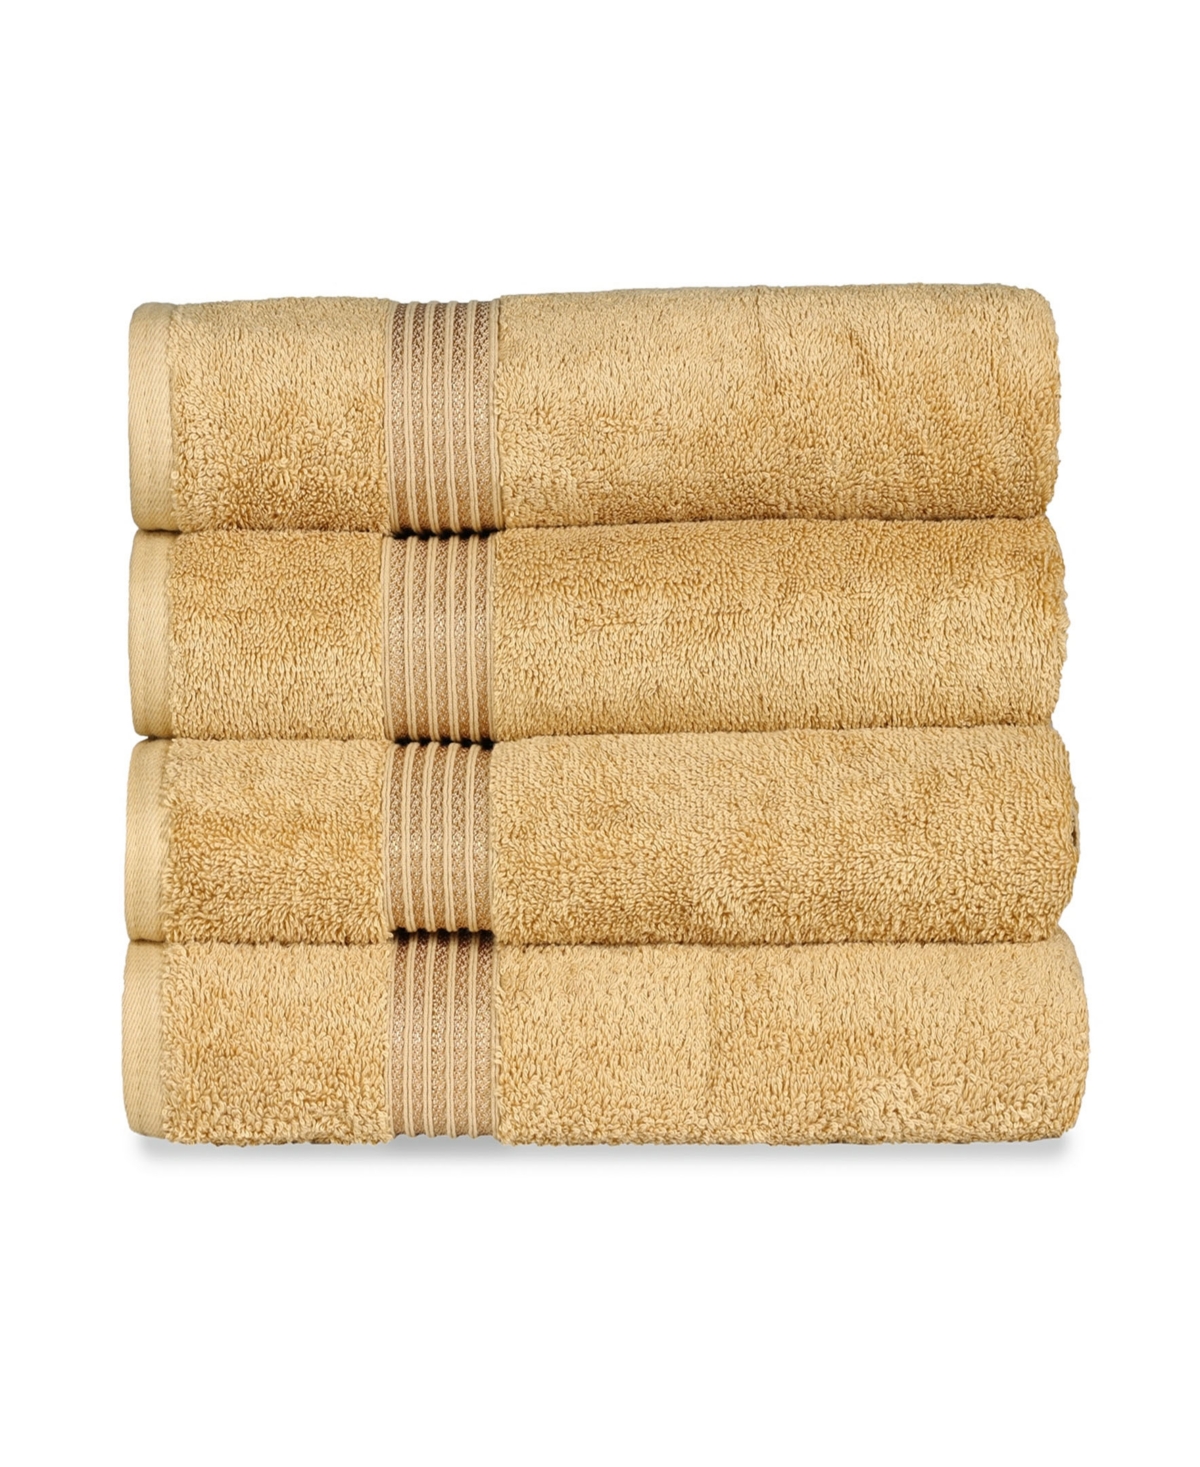 Superior Solid Quick Drying Absorbent 4 Piece Egyptian Cotton Bath Towel Set Bedding In Gold